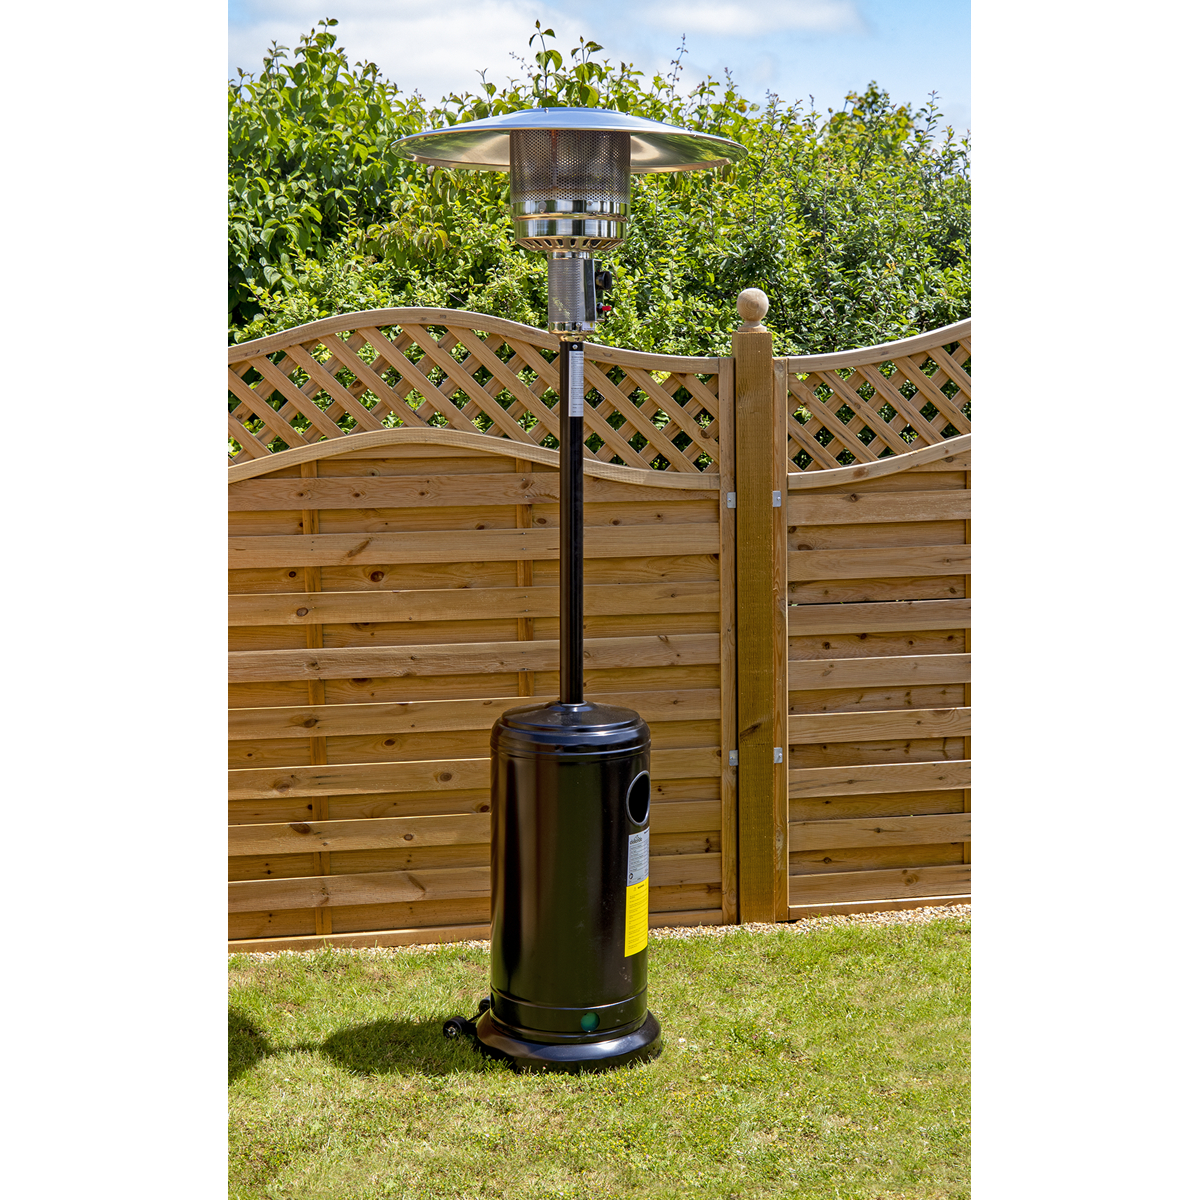 Dg1 Propane Gas Tower Patio Heater 13kw pertaining to measurements 1200 X 1200